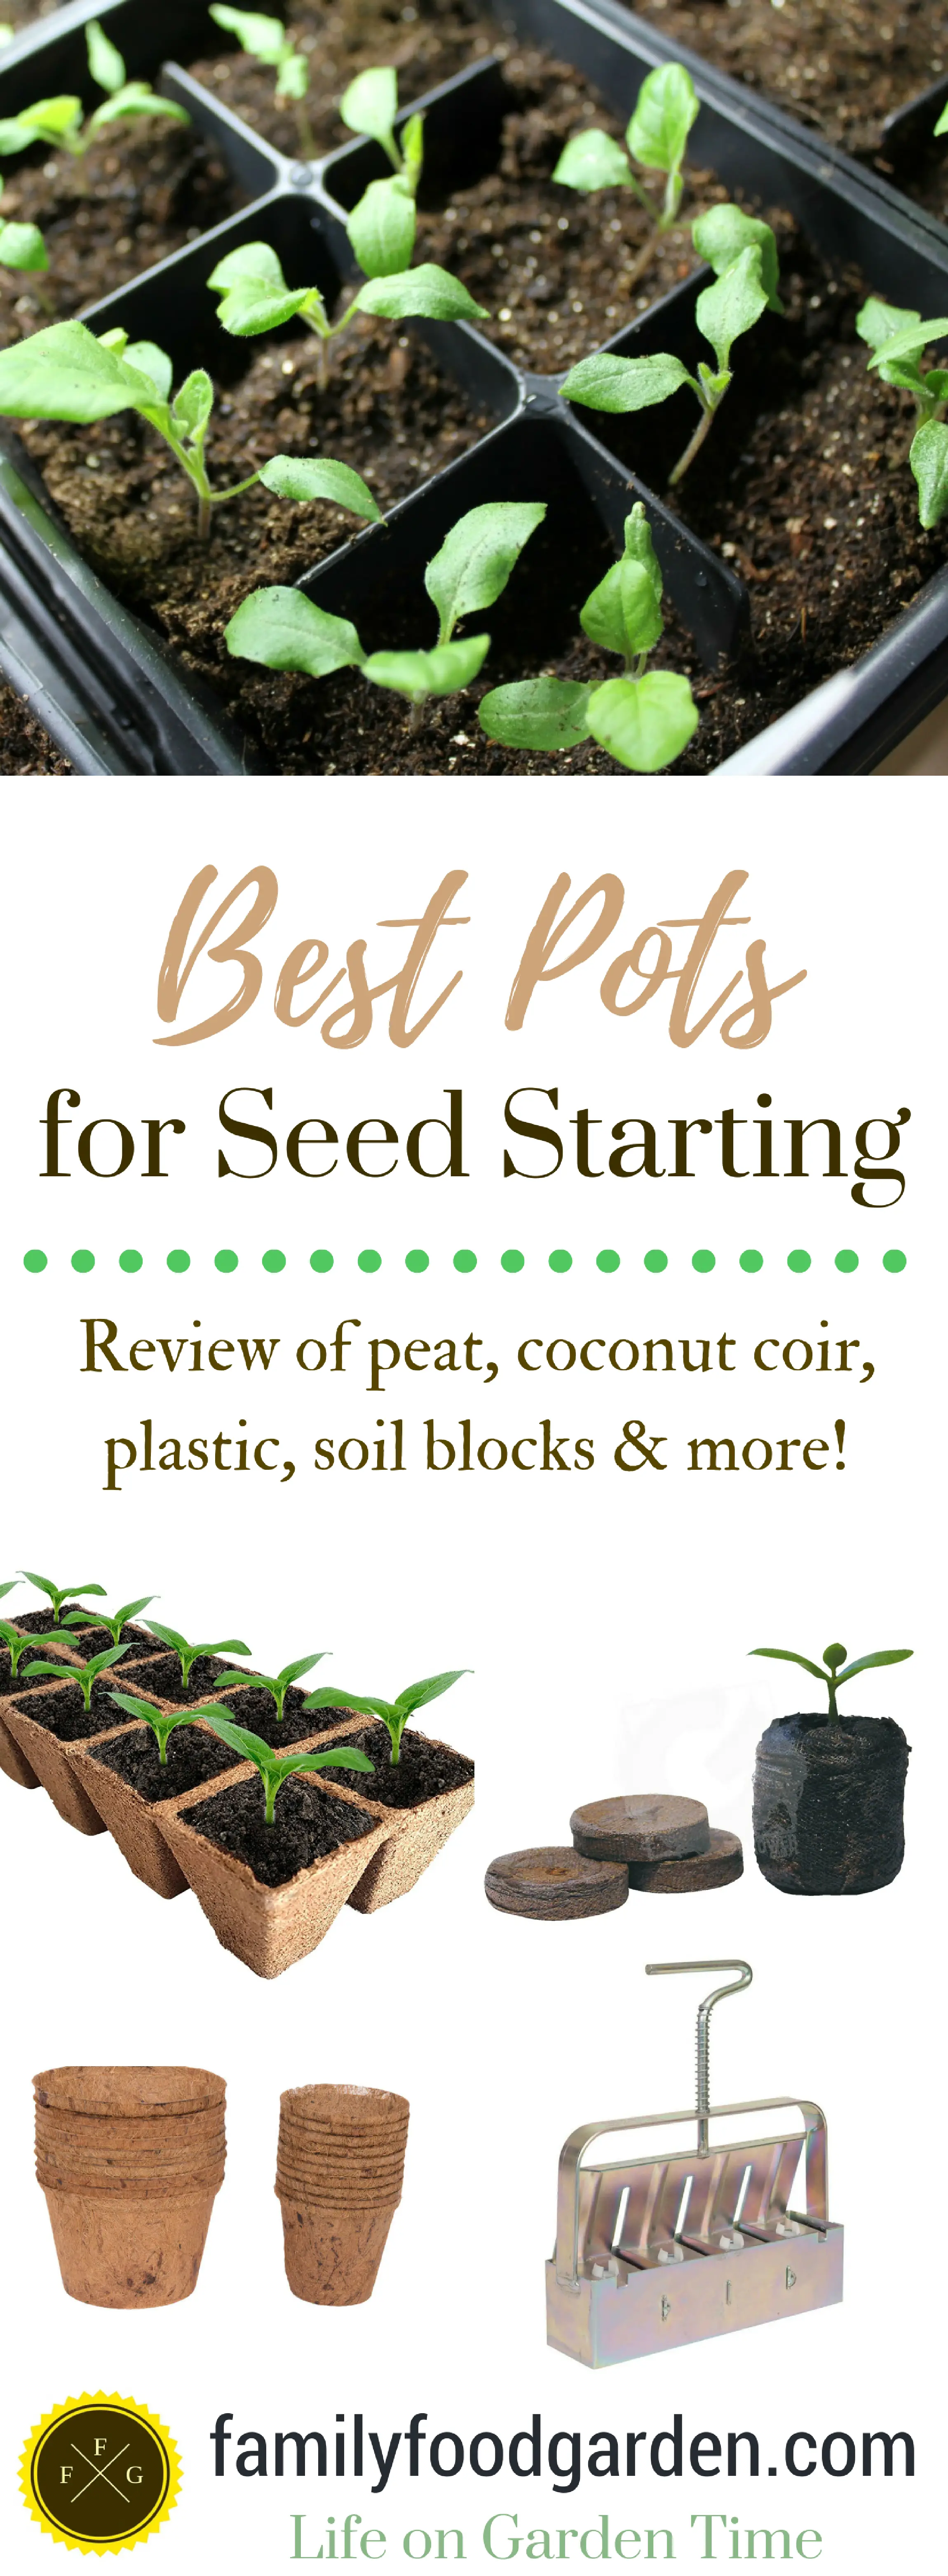 Best Pots for Seed Staring: Review of peat, coconut coir, plastic, soil blocks & more!